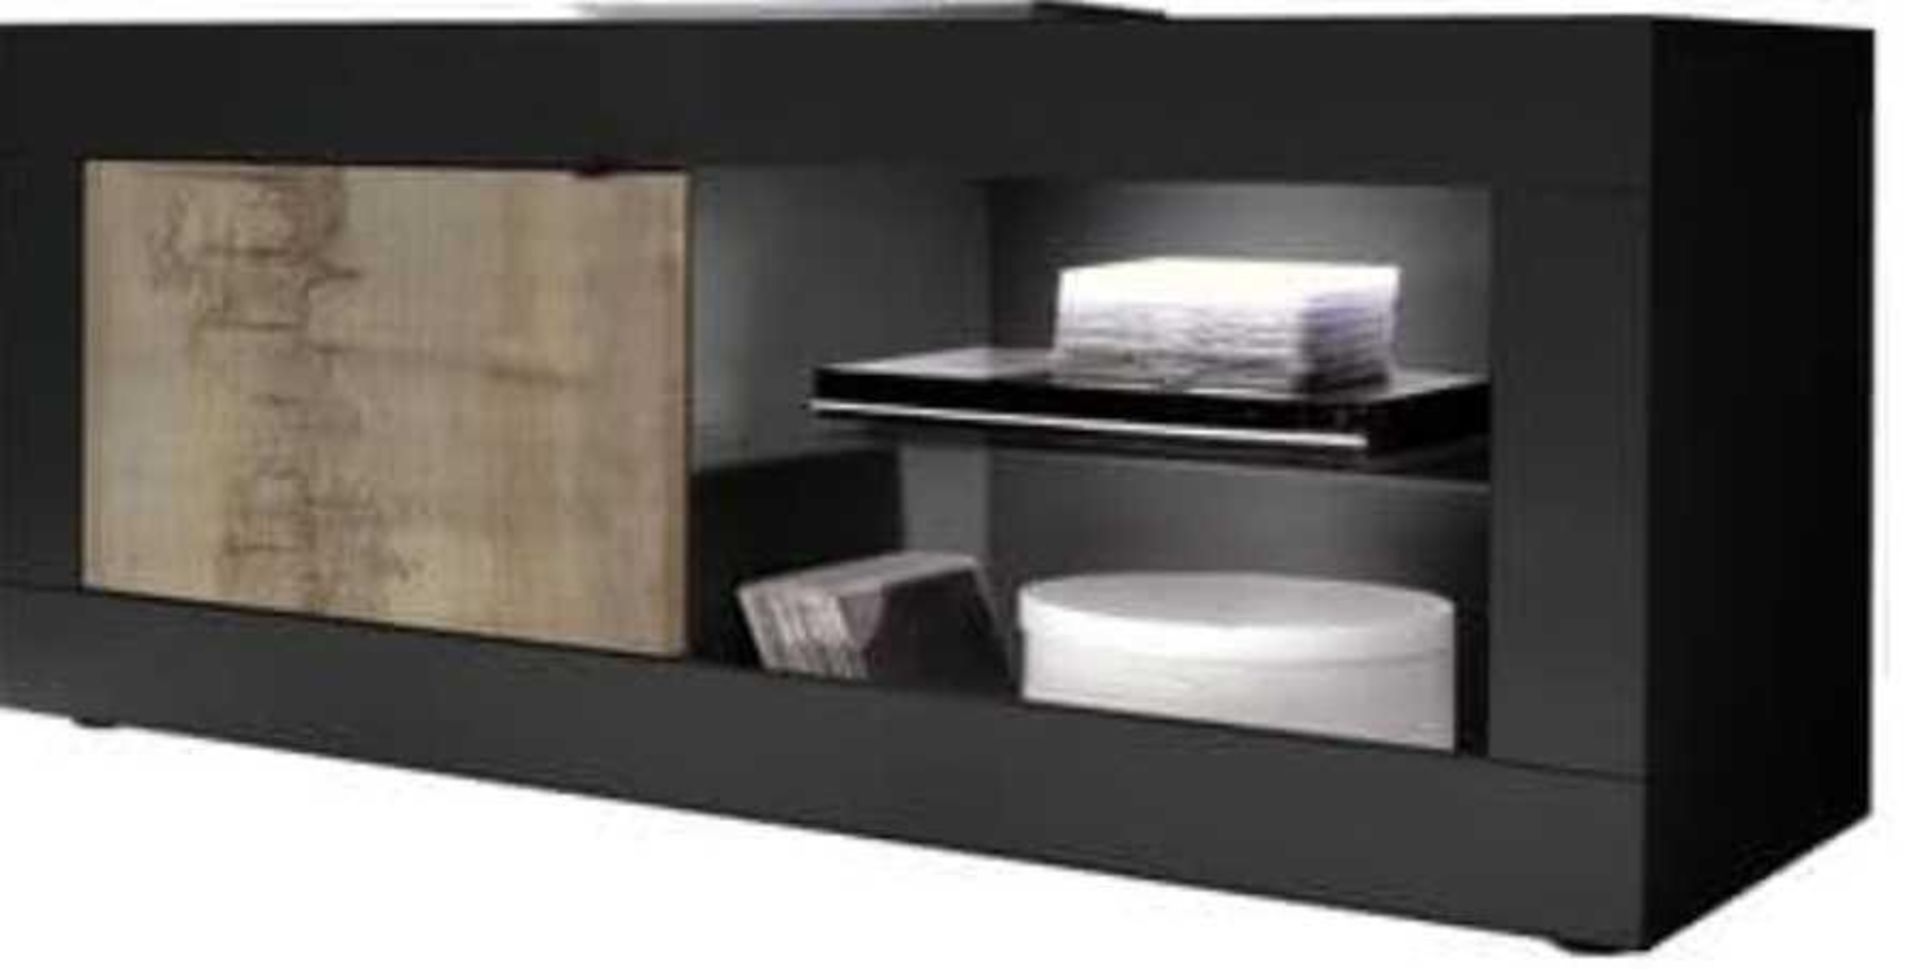 RRP £250 Boxed Interlink Absoluto 12 Tv Shelf - Image 2 of 2